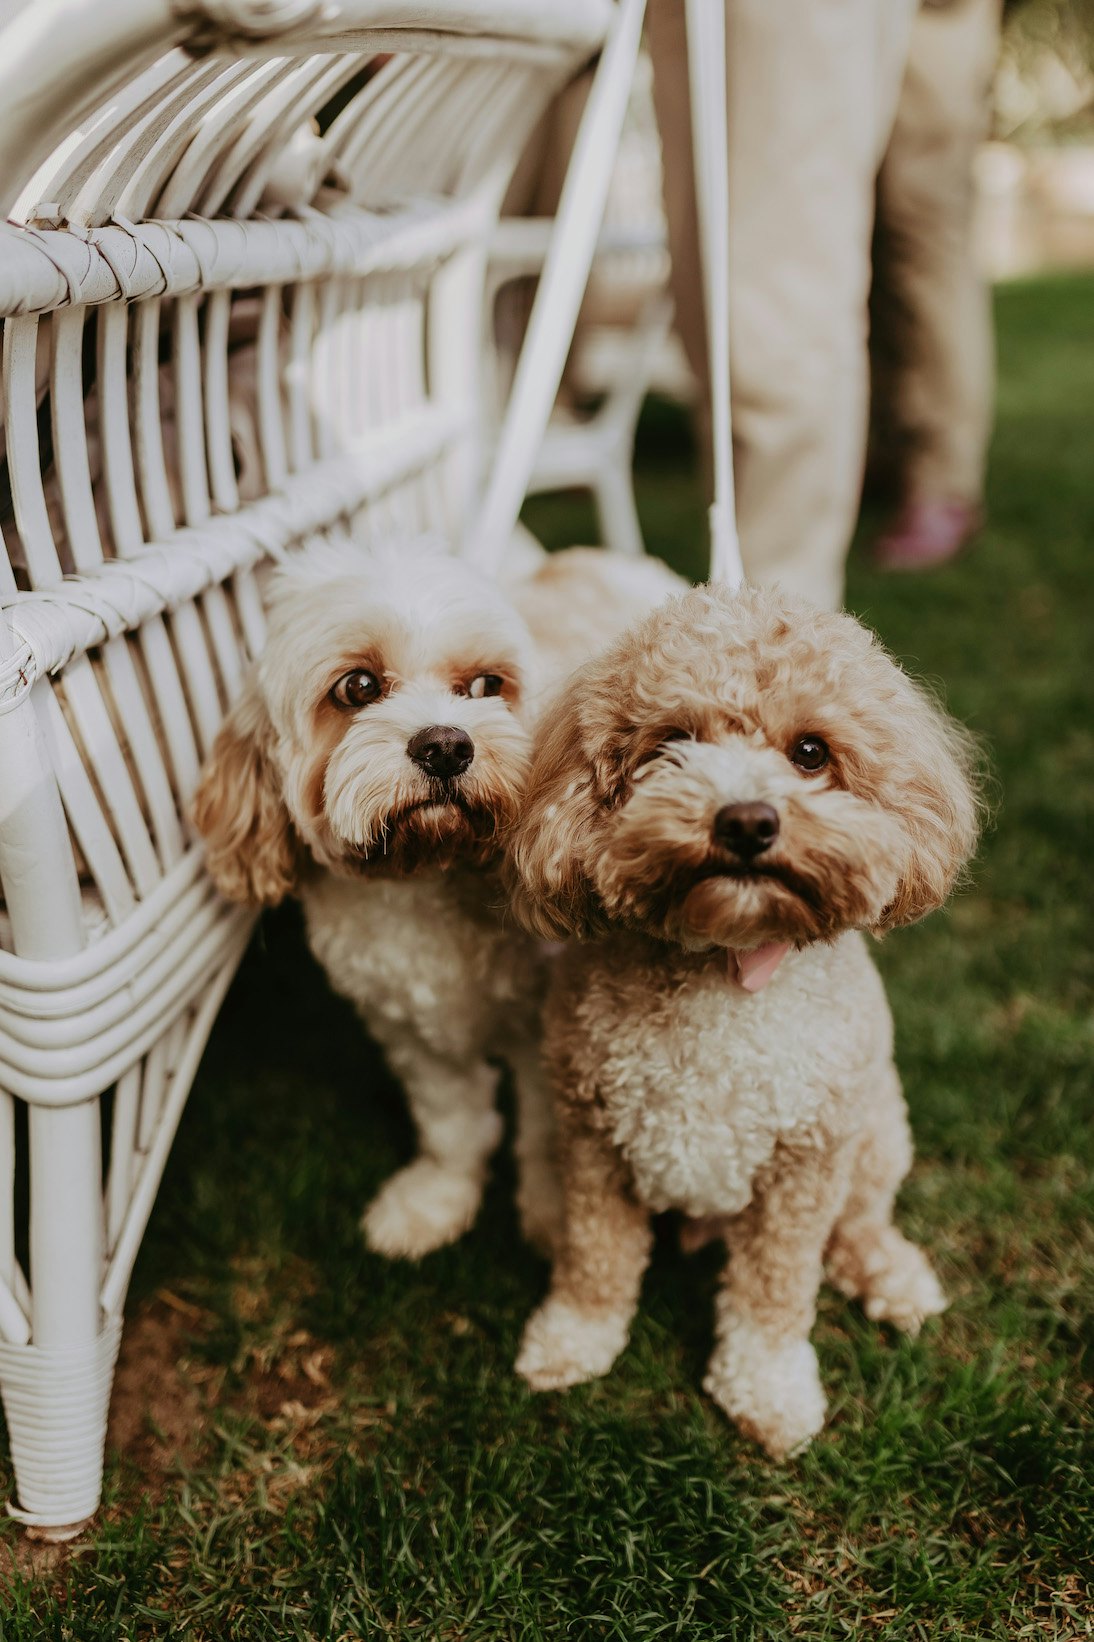 Two poodles standing next to cane lounge